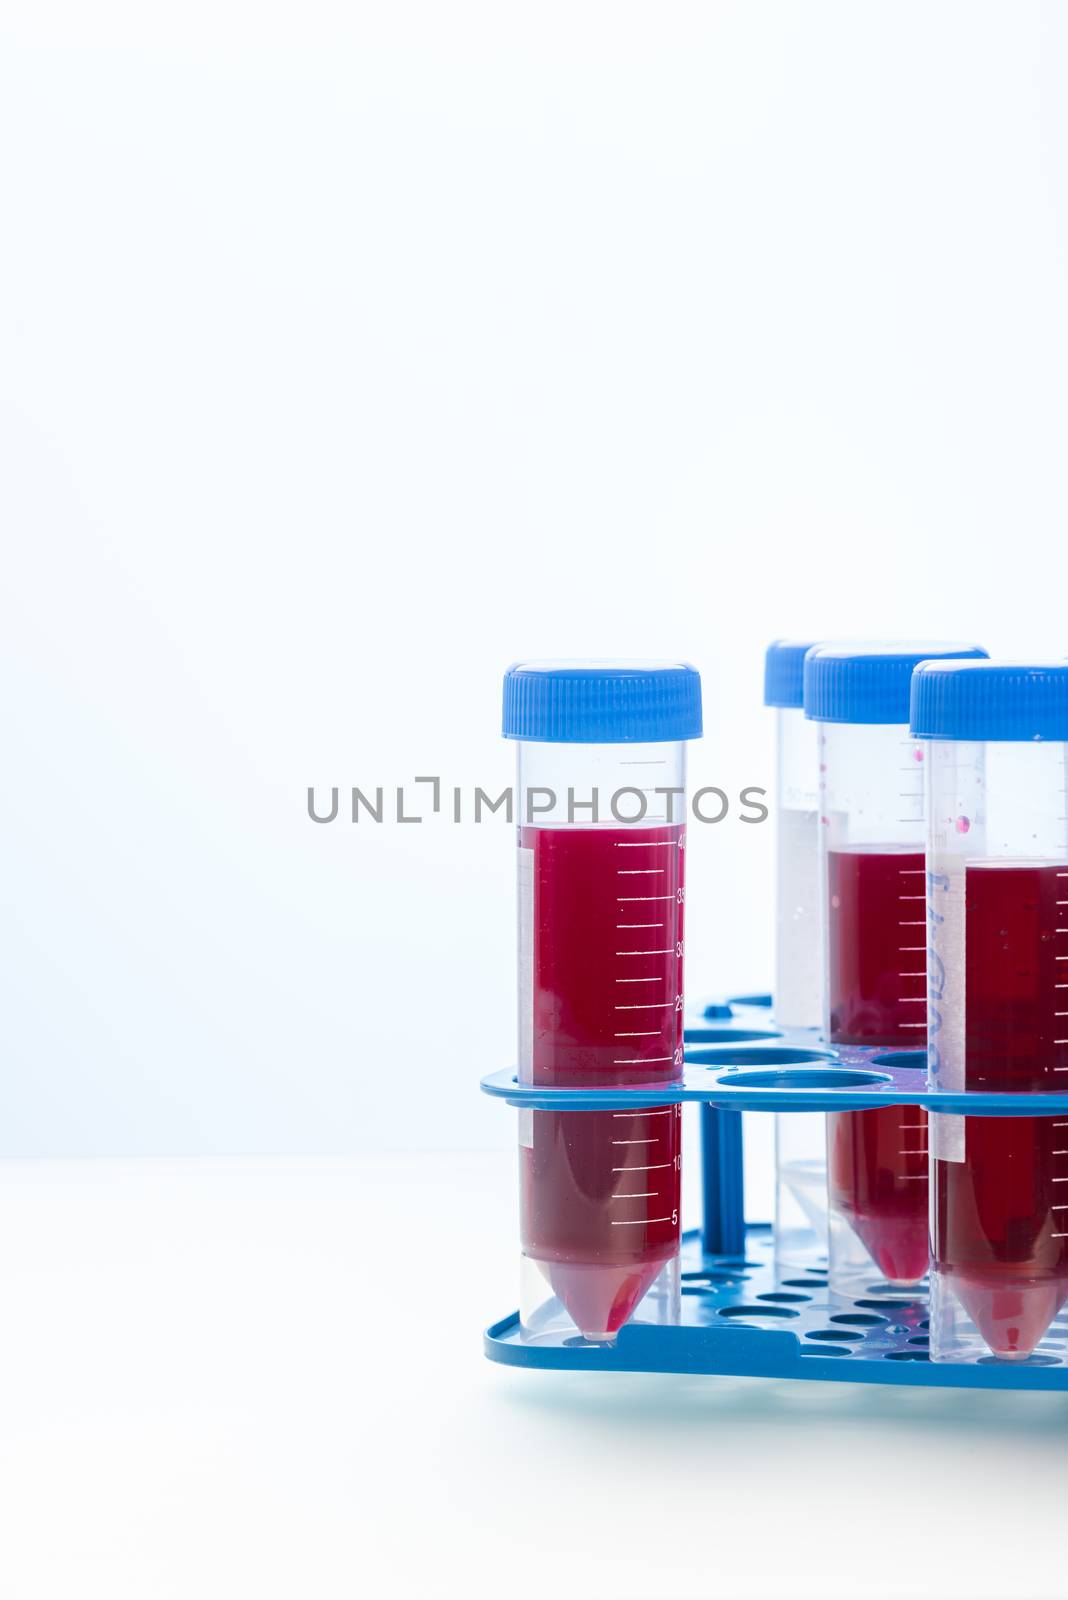 Blood Testing Samples in Laboratory. Covid-19 Blood Test Concept.